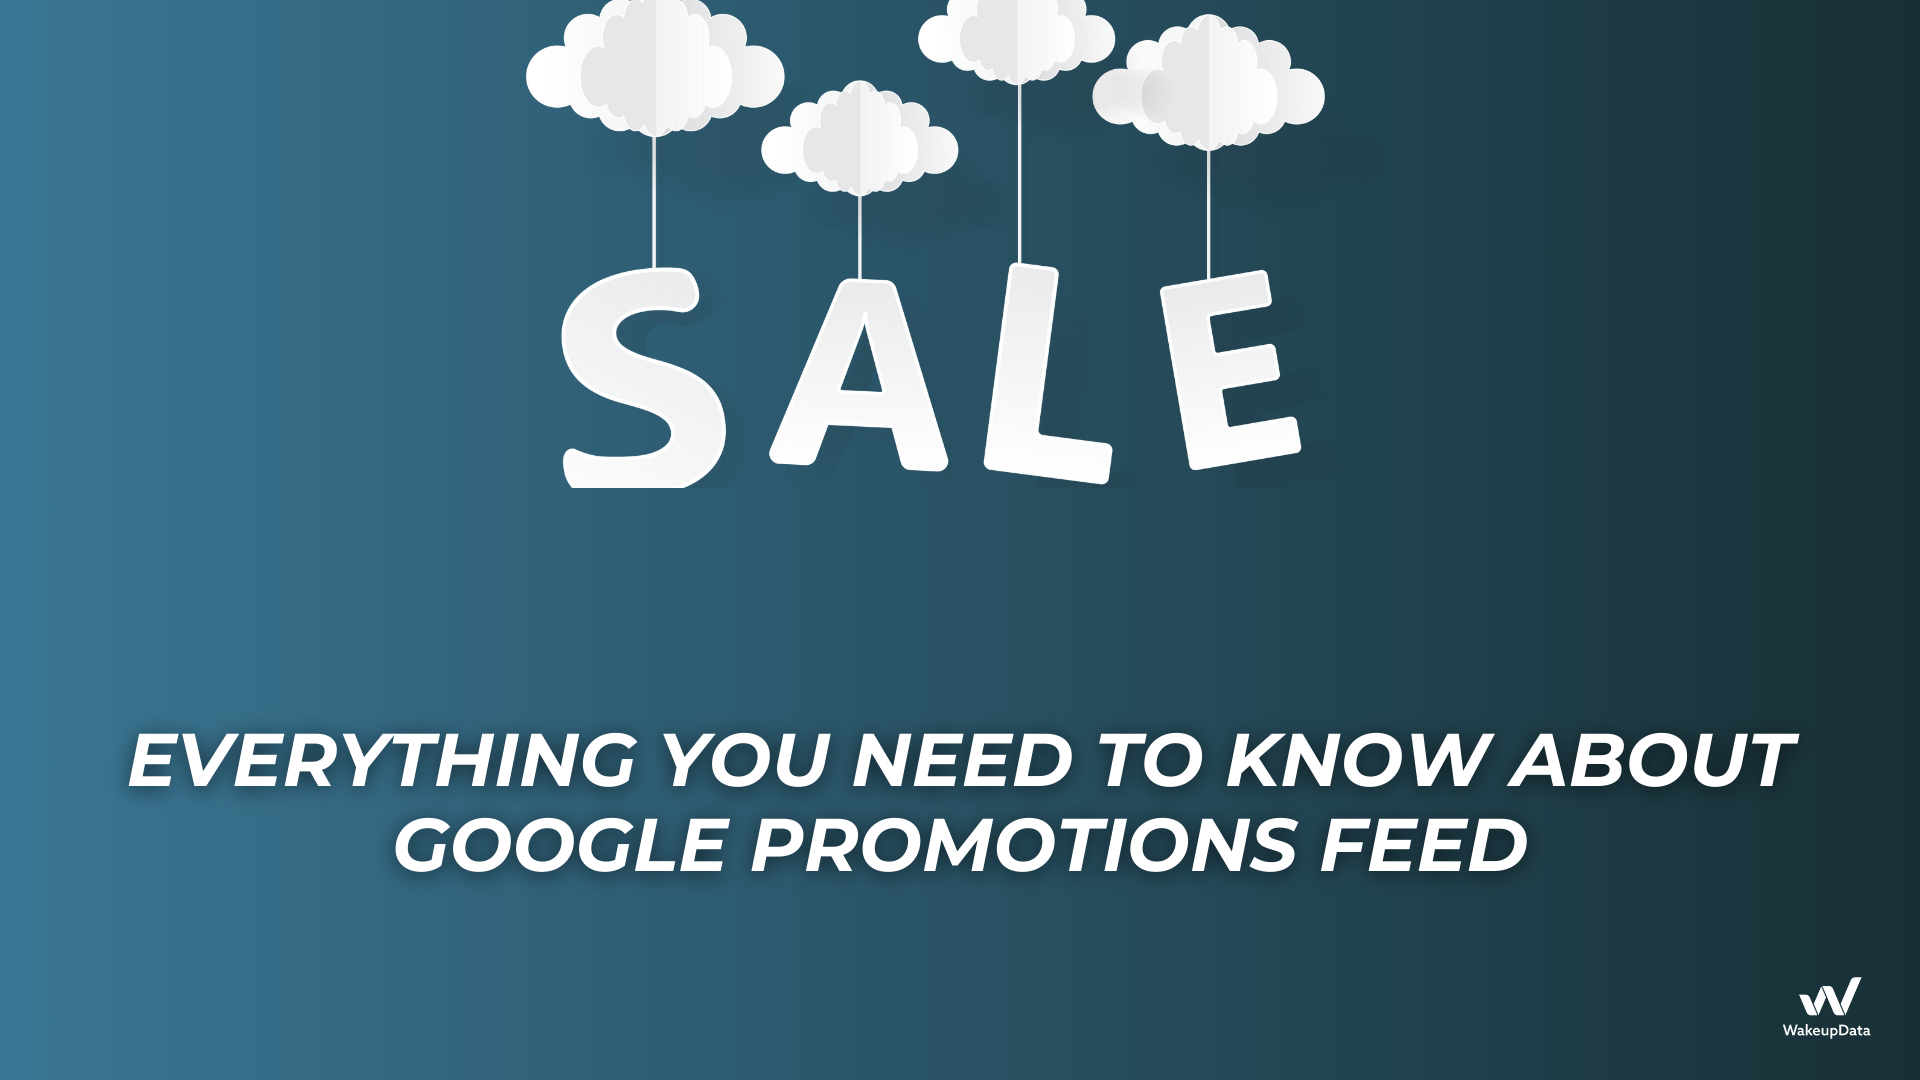 Everything you need to know about Google Promotions feed